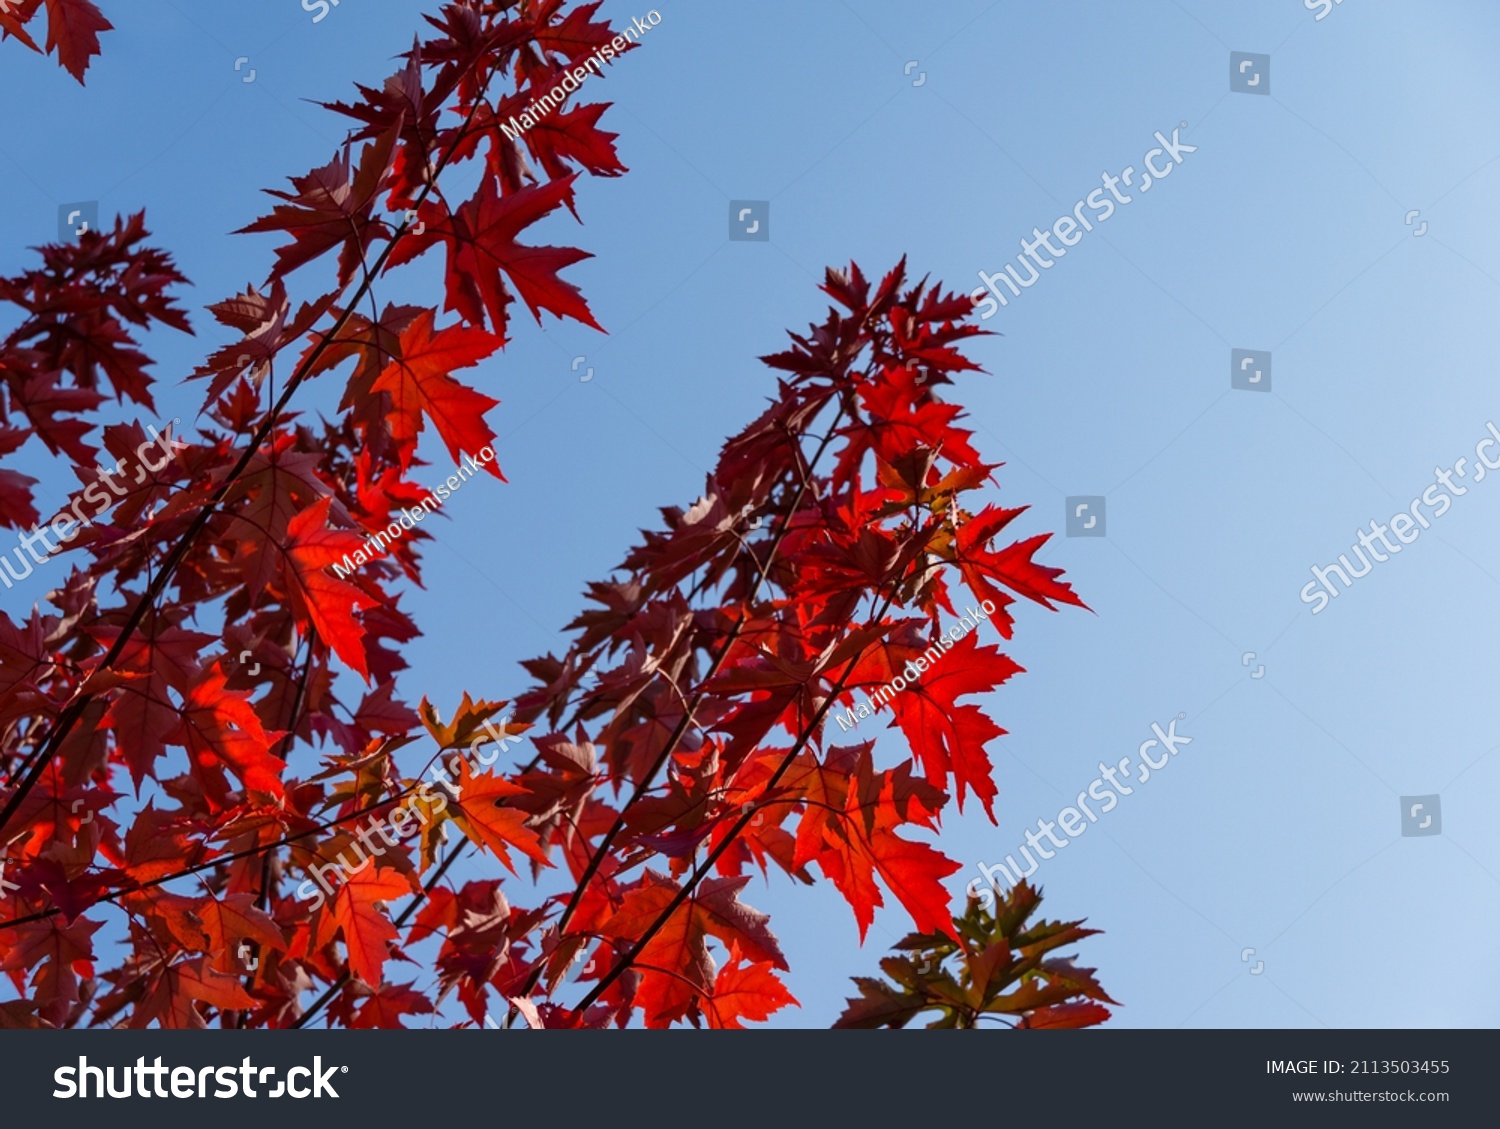 Red leaves of Acer freemanii Autumn Blaze on blue sky background. Close-up of fall colors maple tree leaves in resort area of Goryachiy Klyuch. #2113503455